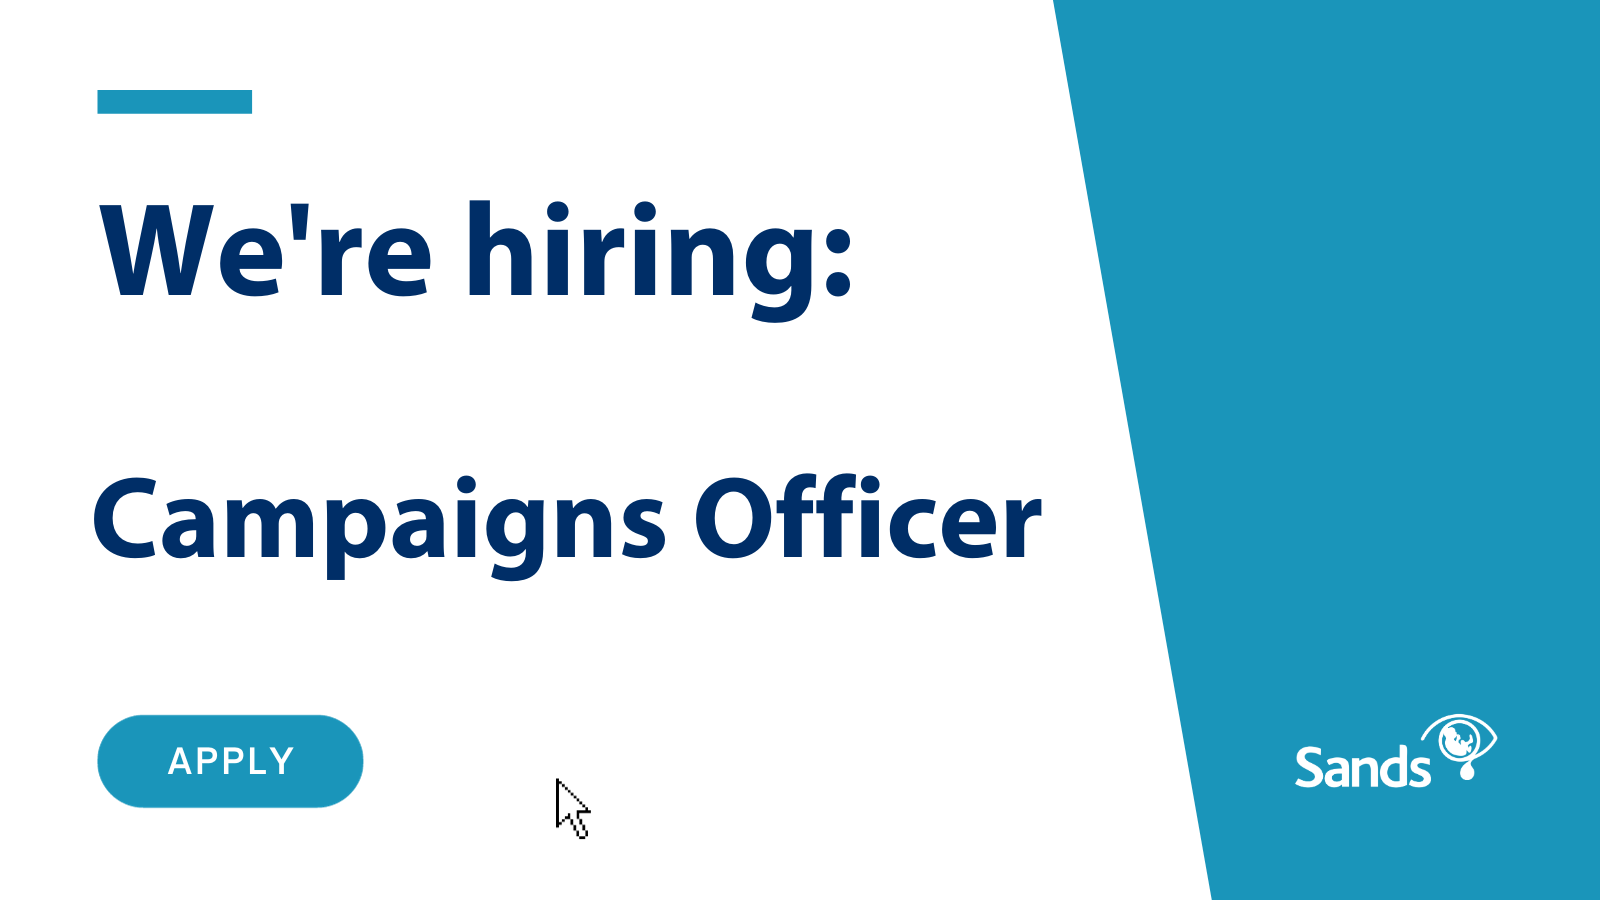 We are hiring Campaigns Officer